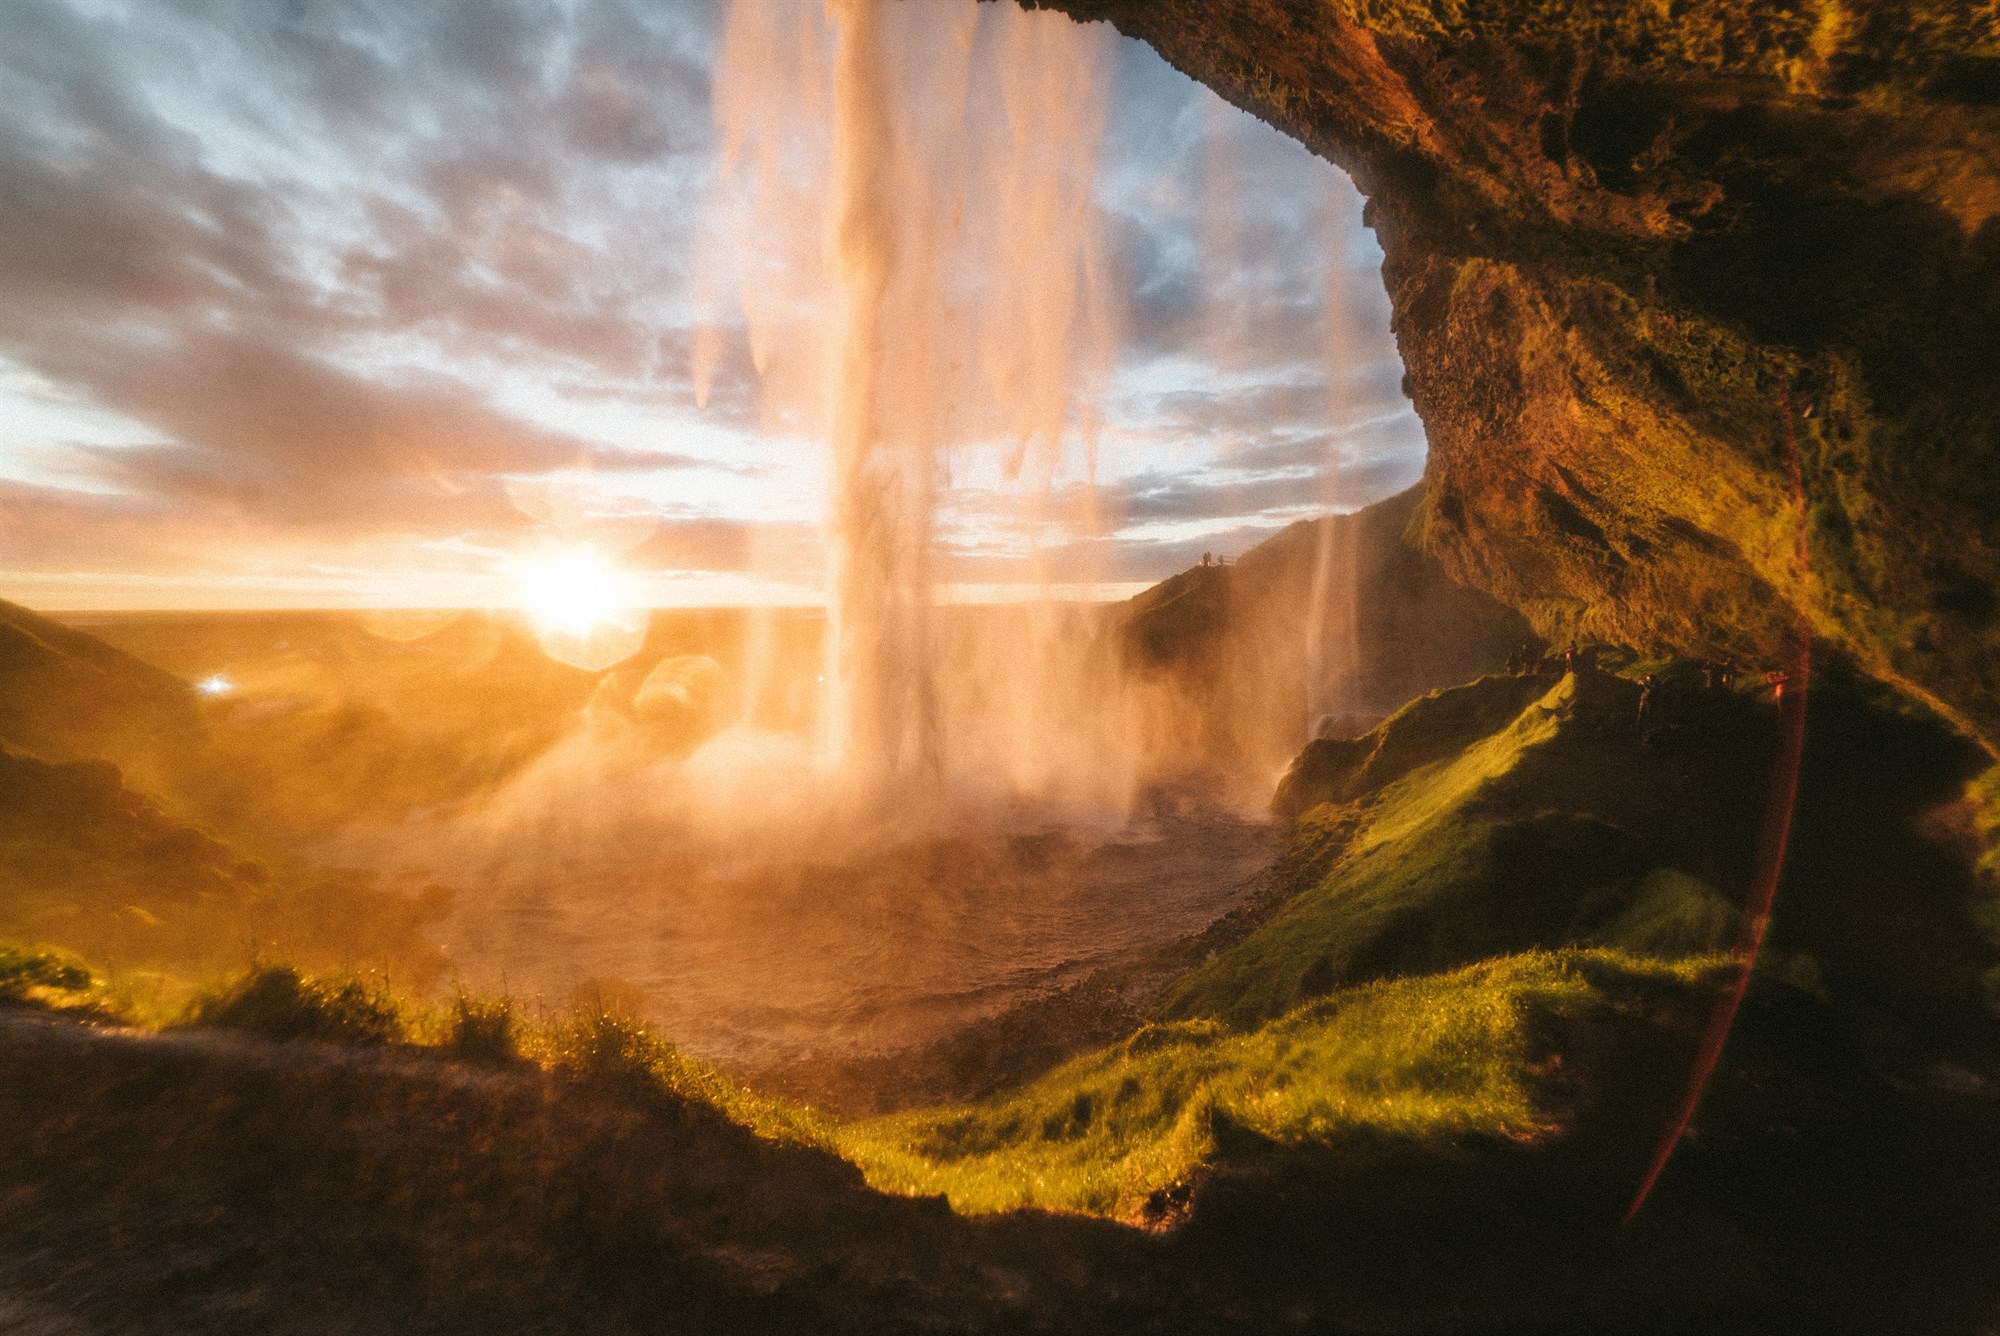 The Complete Guide to the Midnight Sun in Iceland